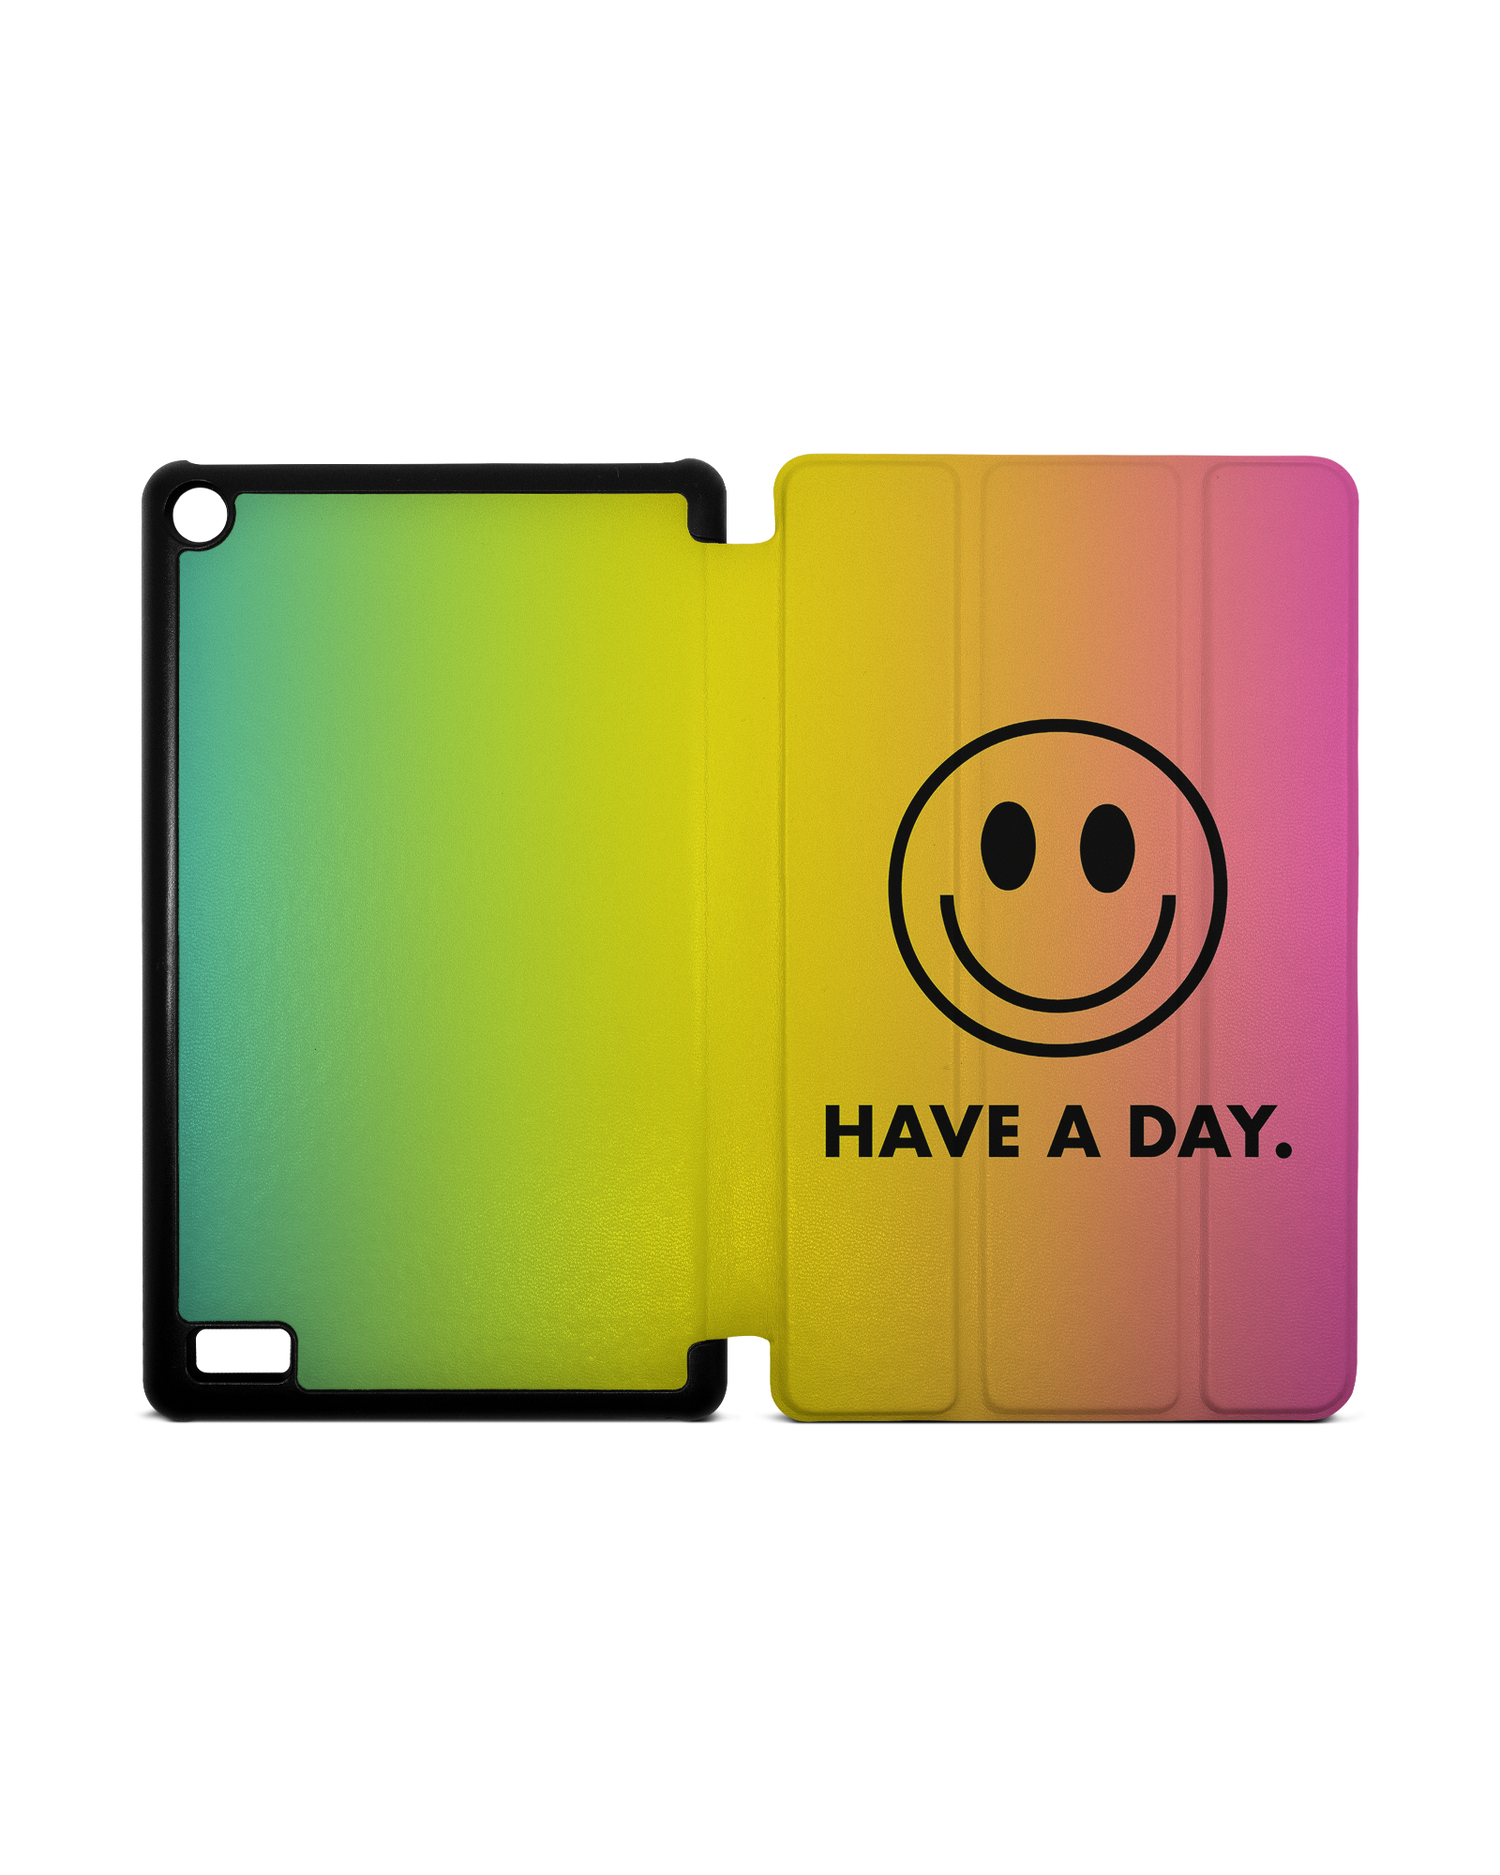 Have A Day Tablet Smart Case for Amazon Fire 7: Opened